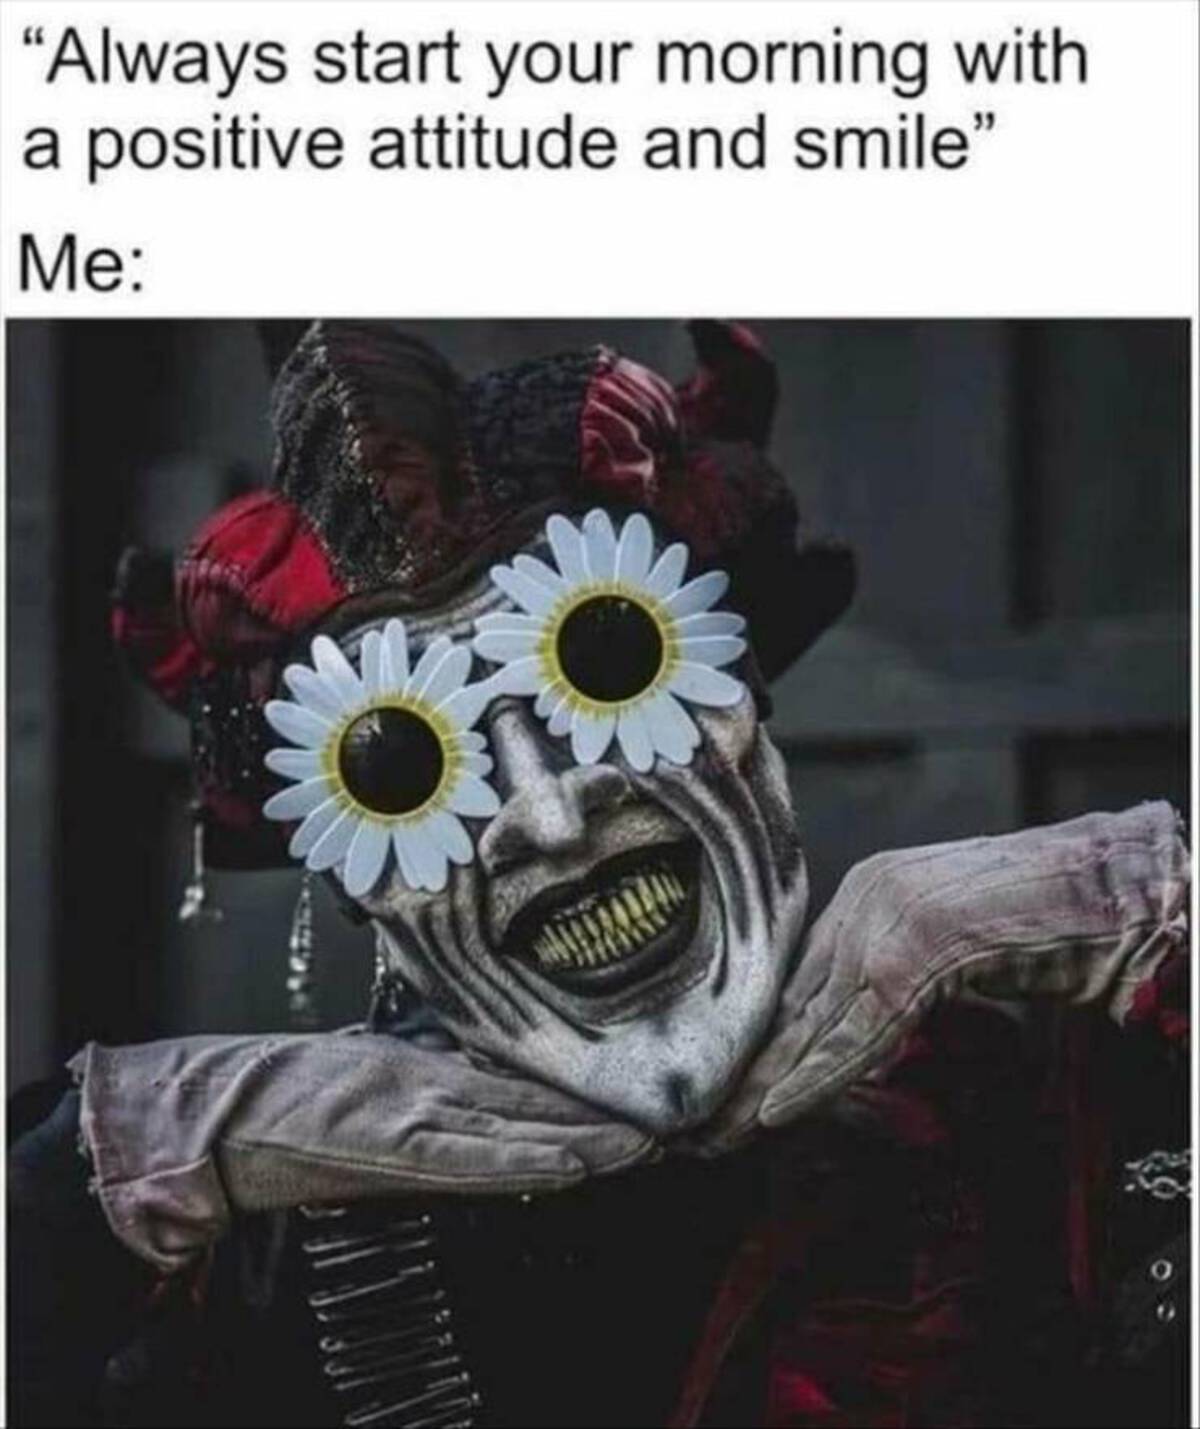 Internet meme - "Always start your morning with a positive attitude and smile" Me